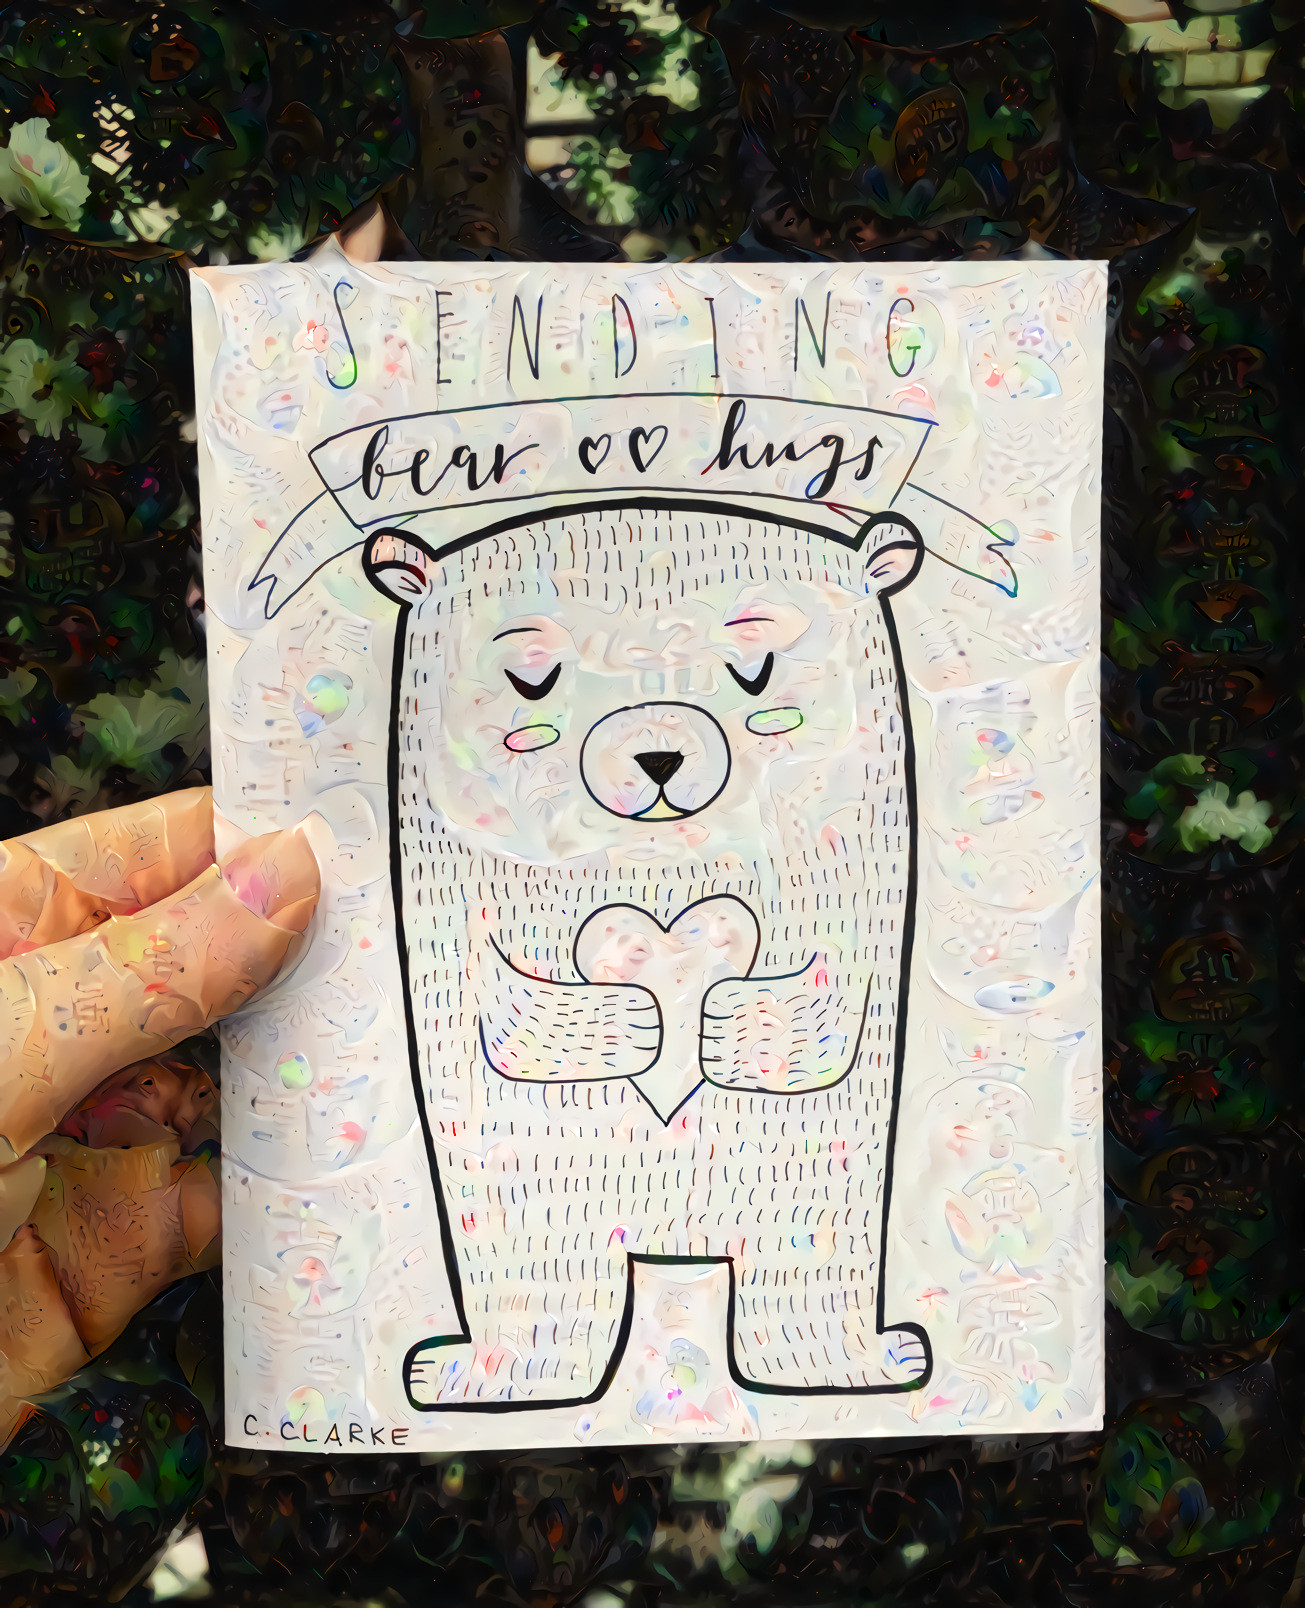 Https://www.etsy.com/listing/676557255/bear-hugs-printable-valentines-card?ref=shop_home_feat_2#